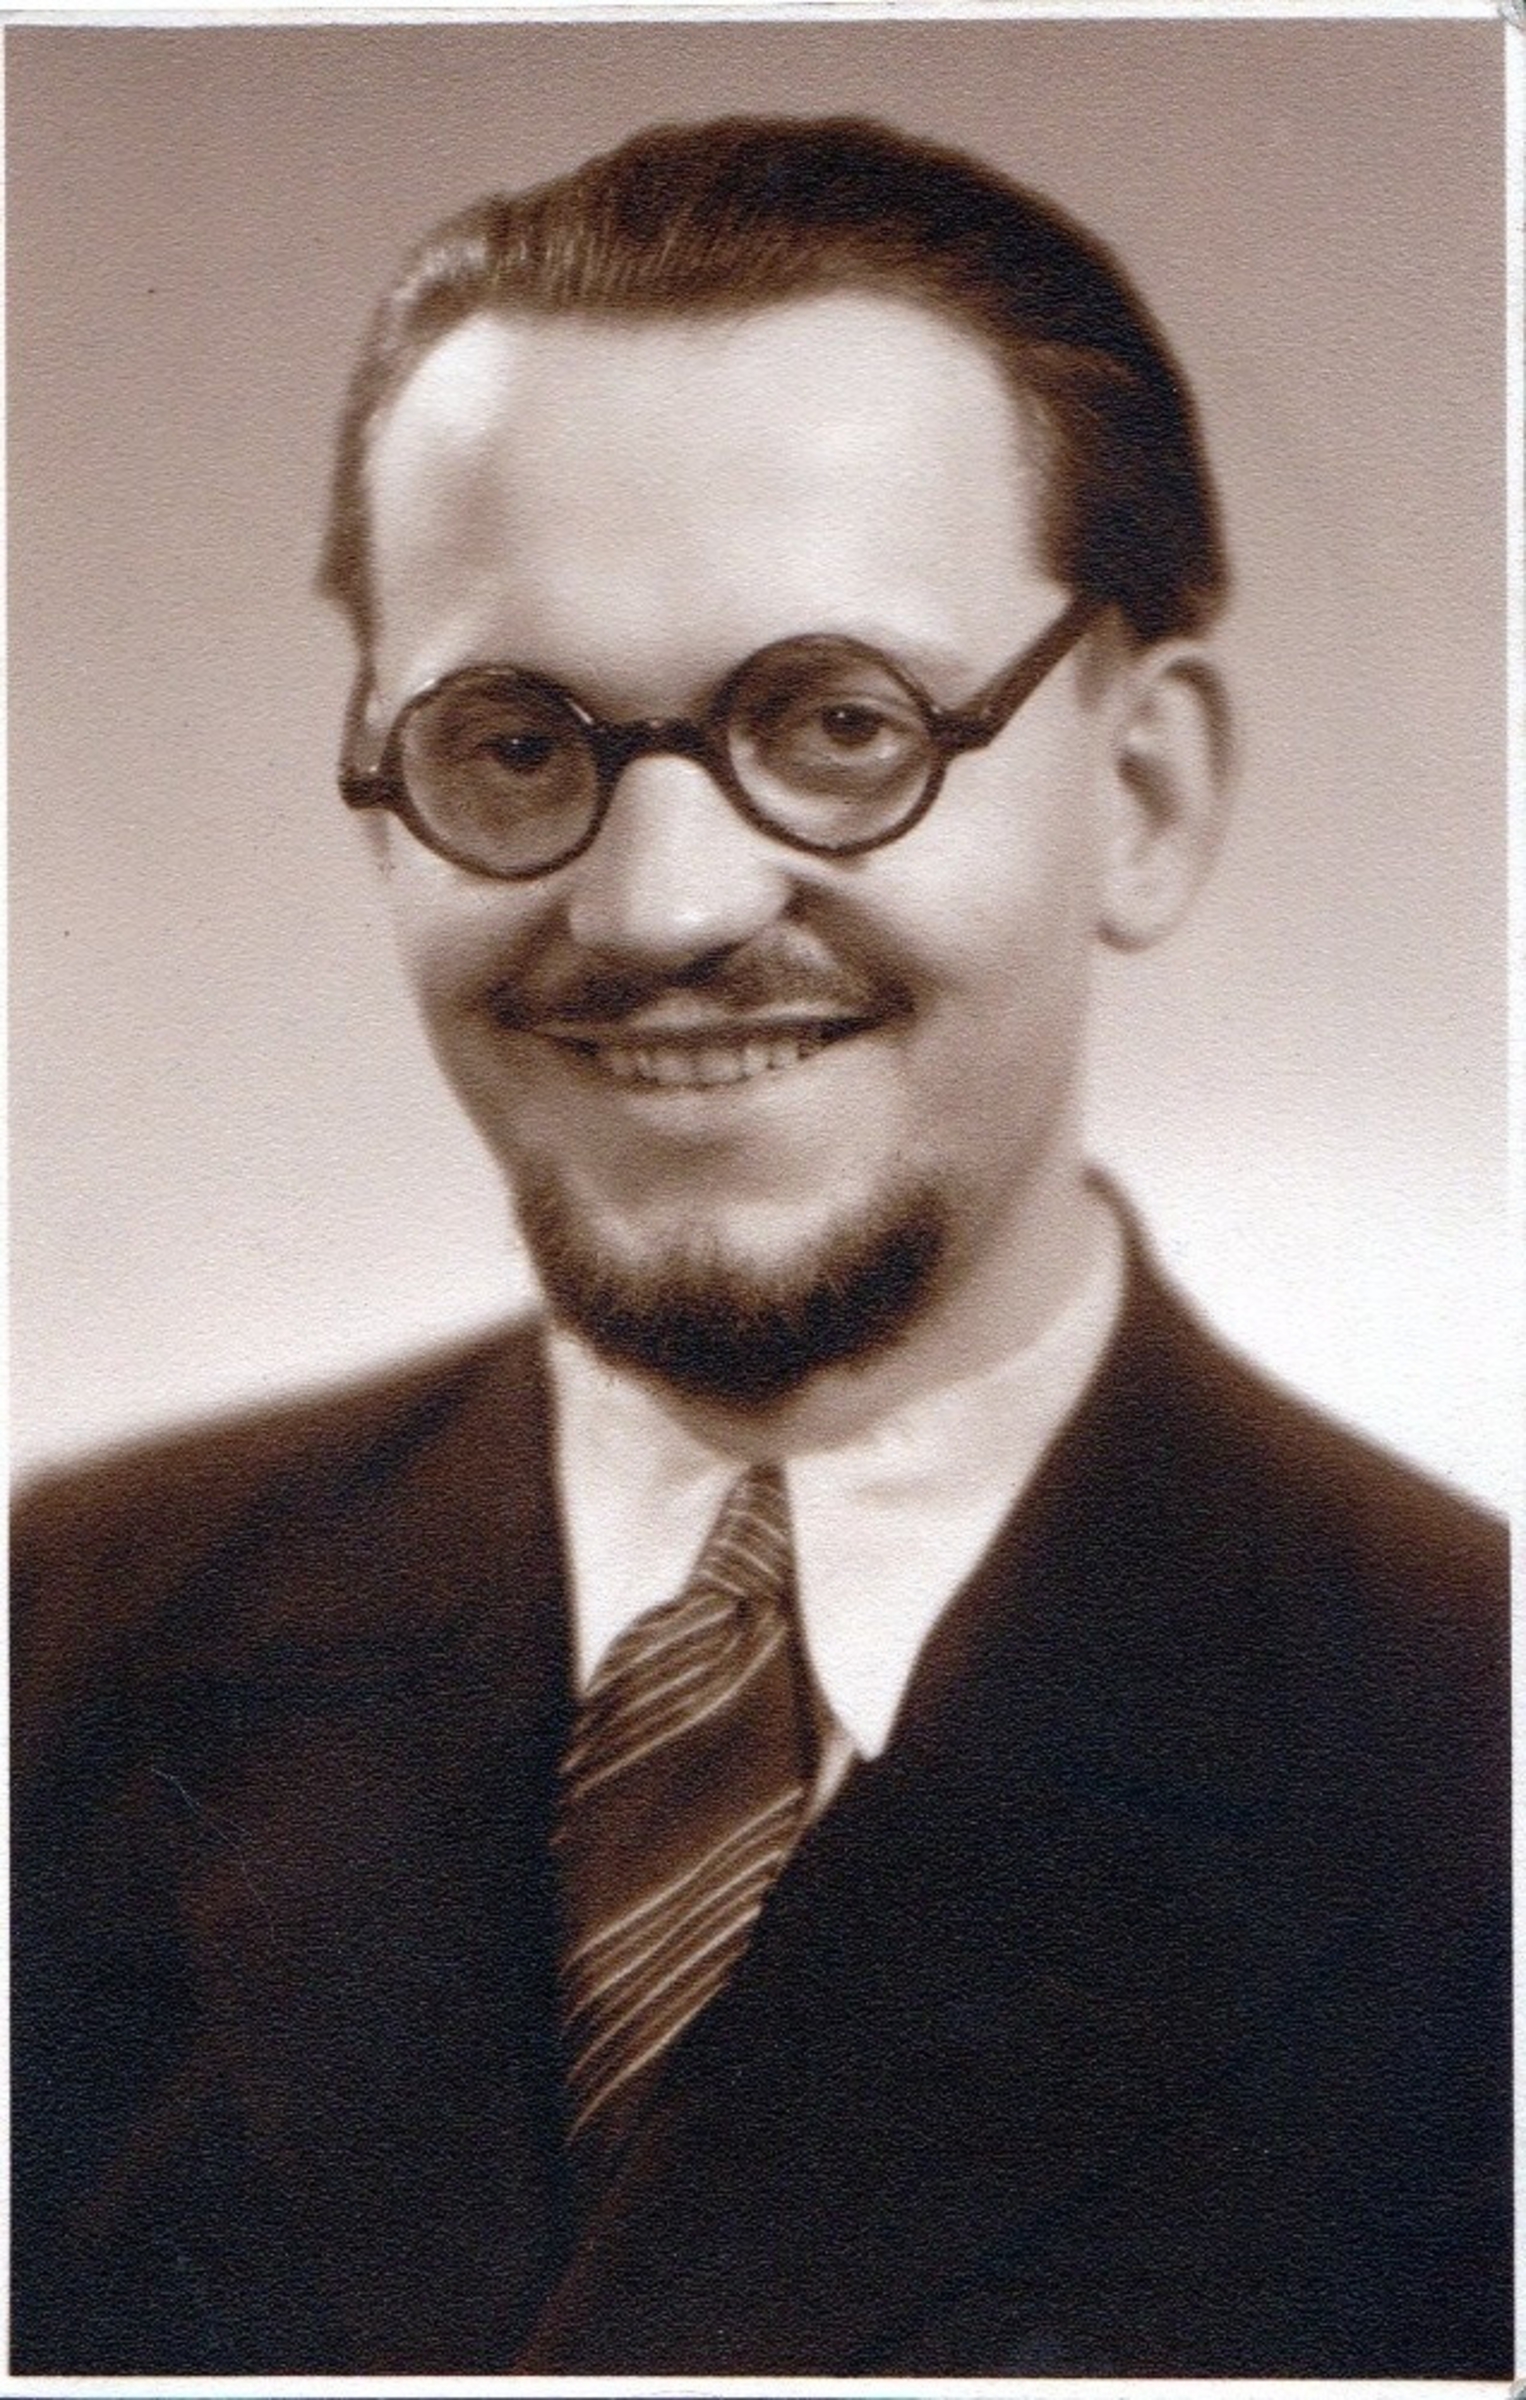 Portrait from the year 1944